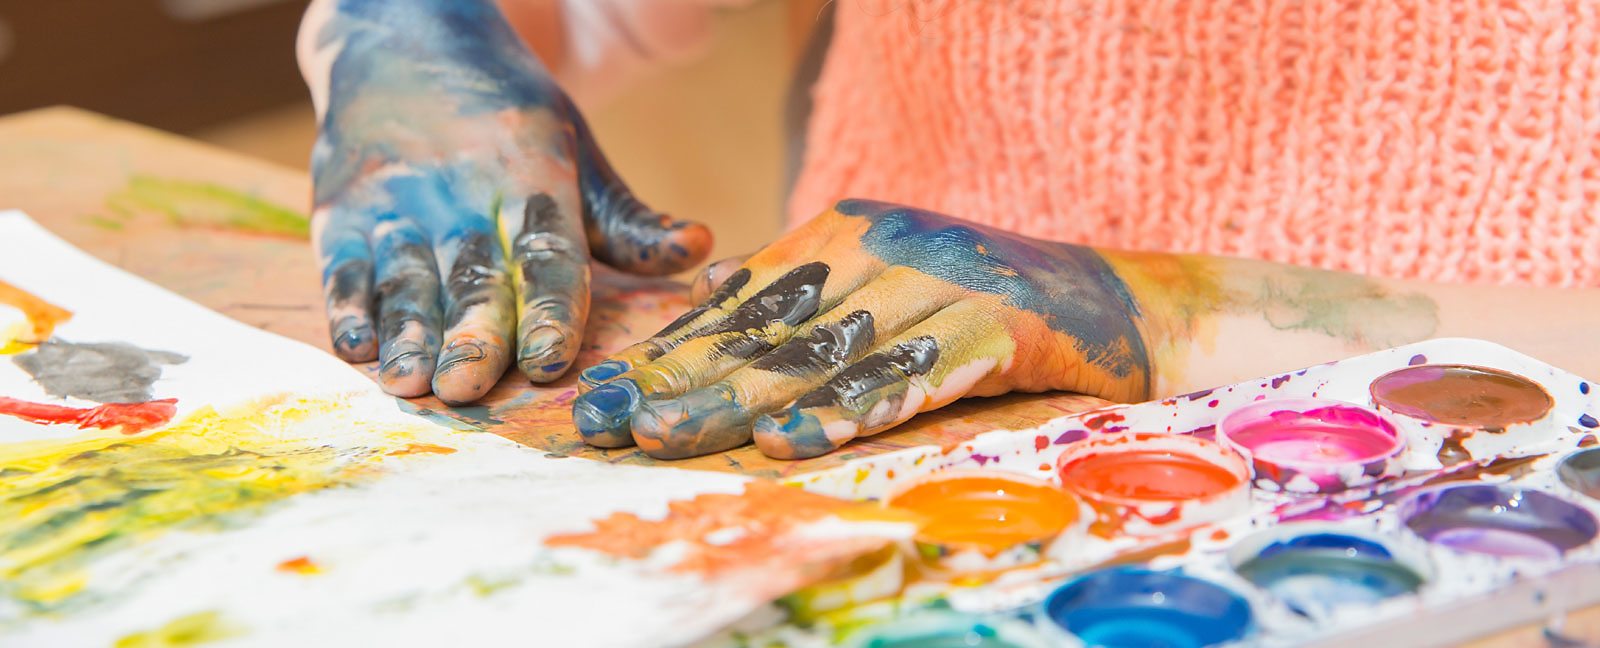 Benefits of Art & Expert Tips to Introduce Art to Young Children